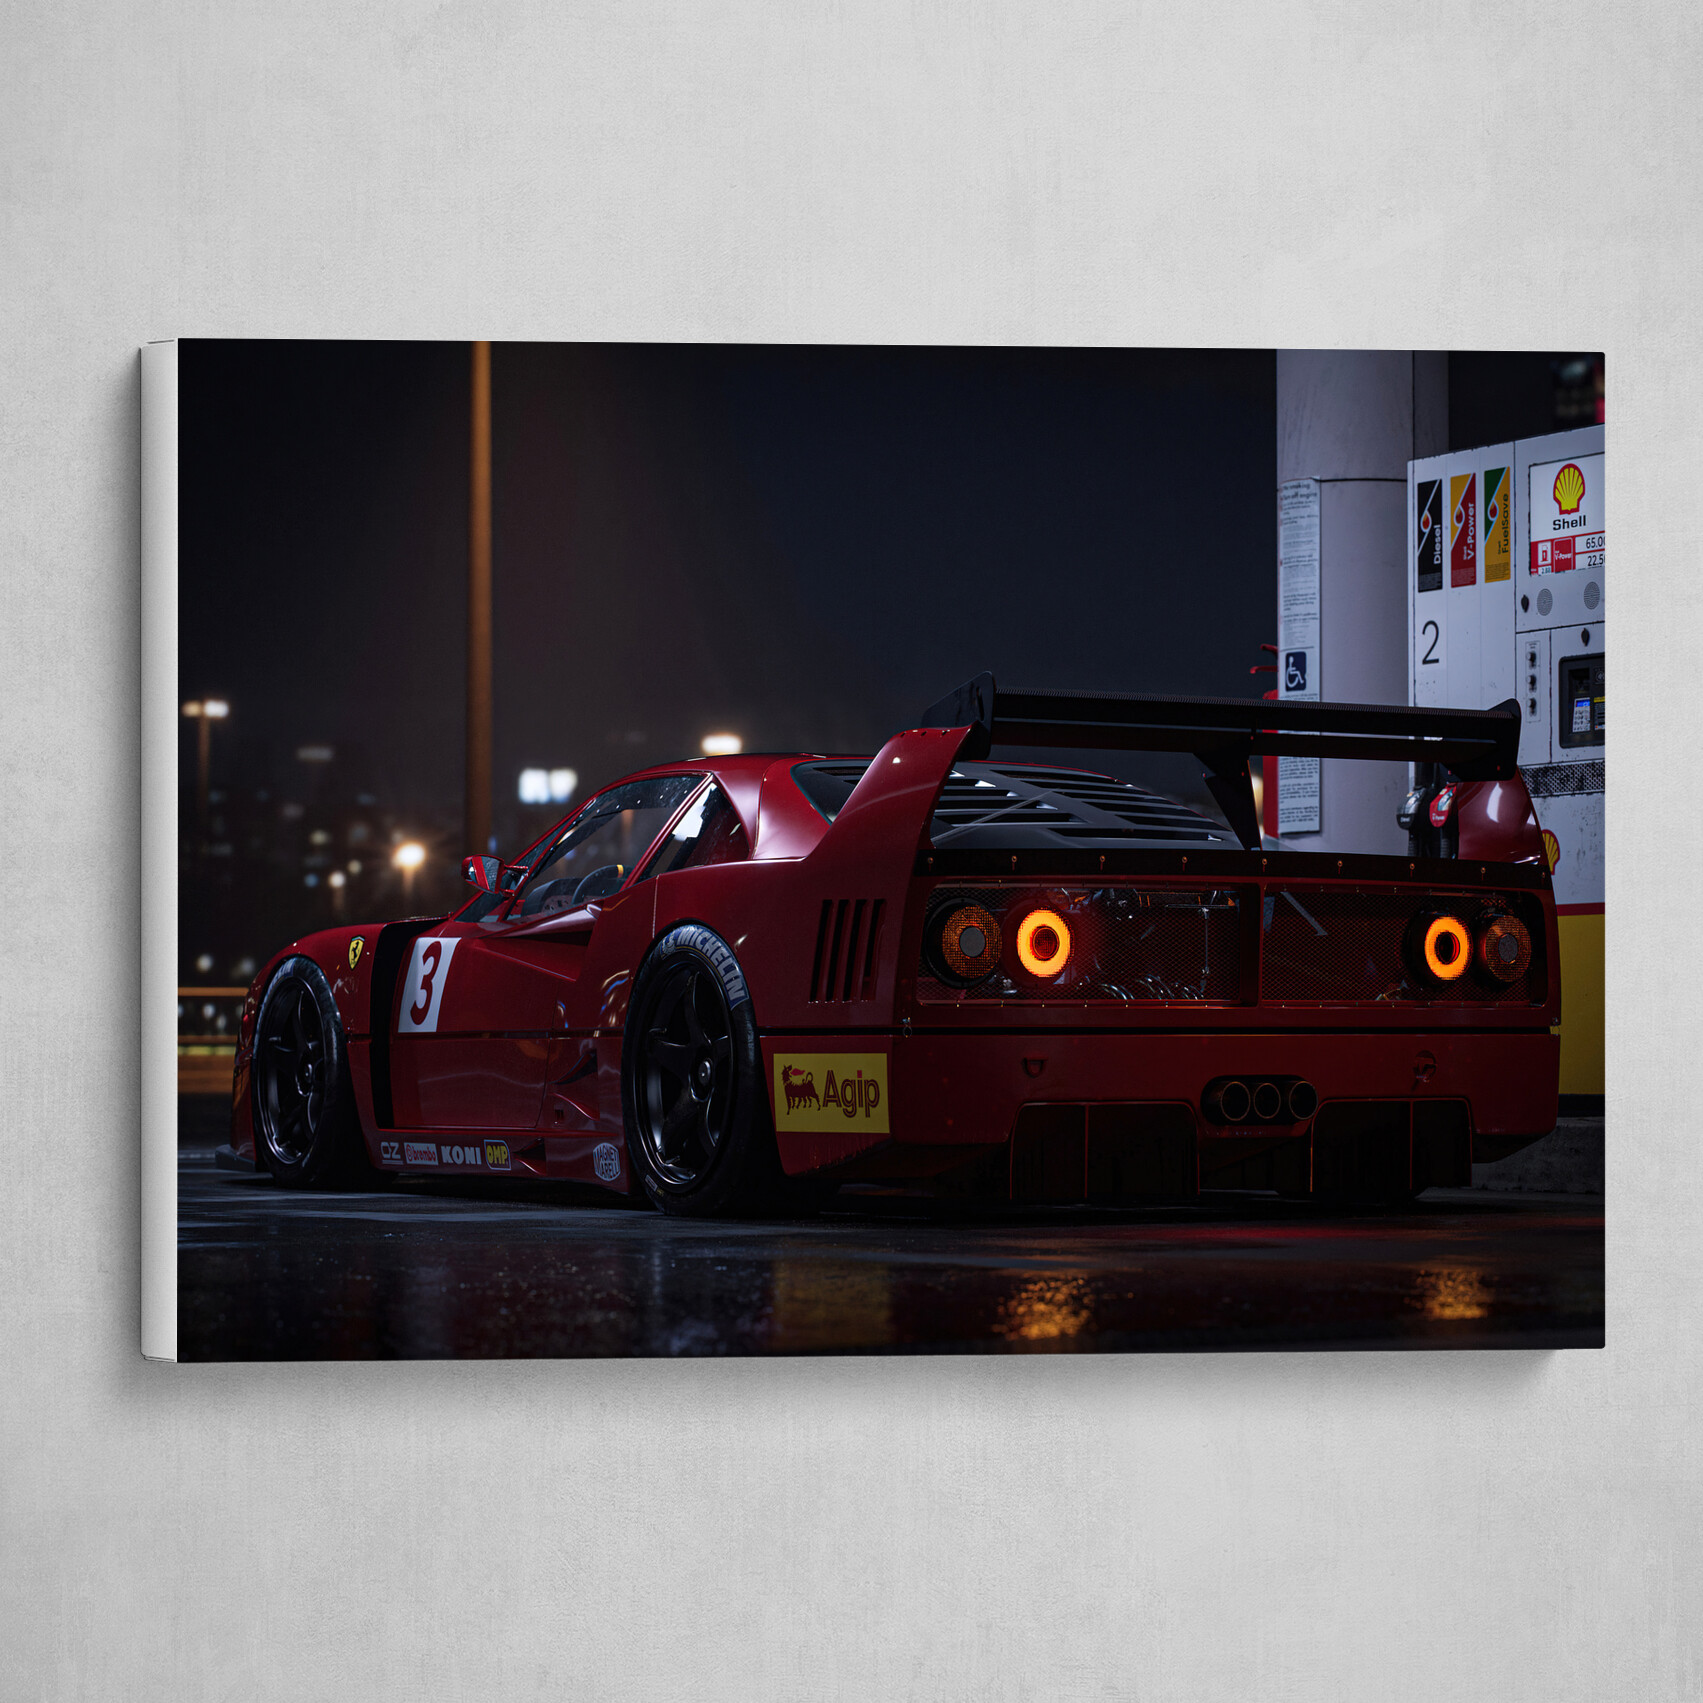 Ferrari F40 LM - Render Achieved with Unreal Engine